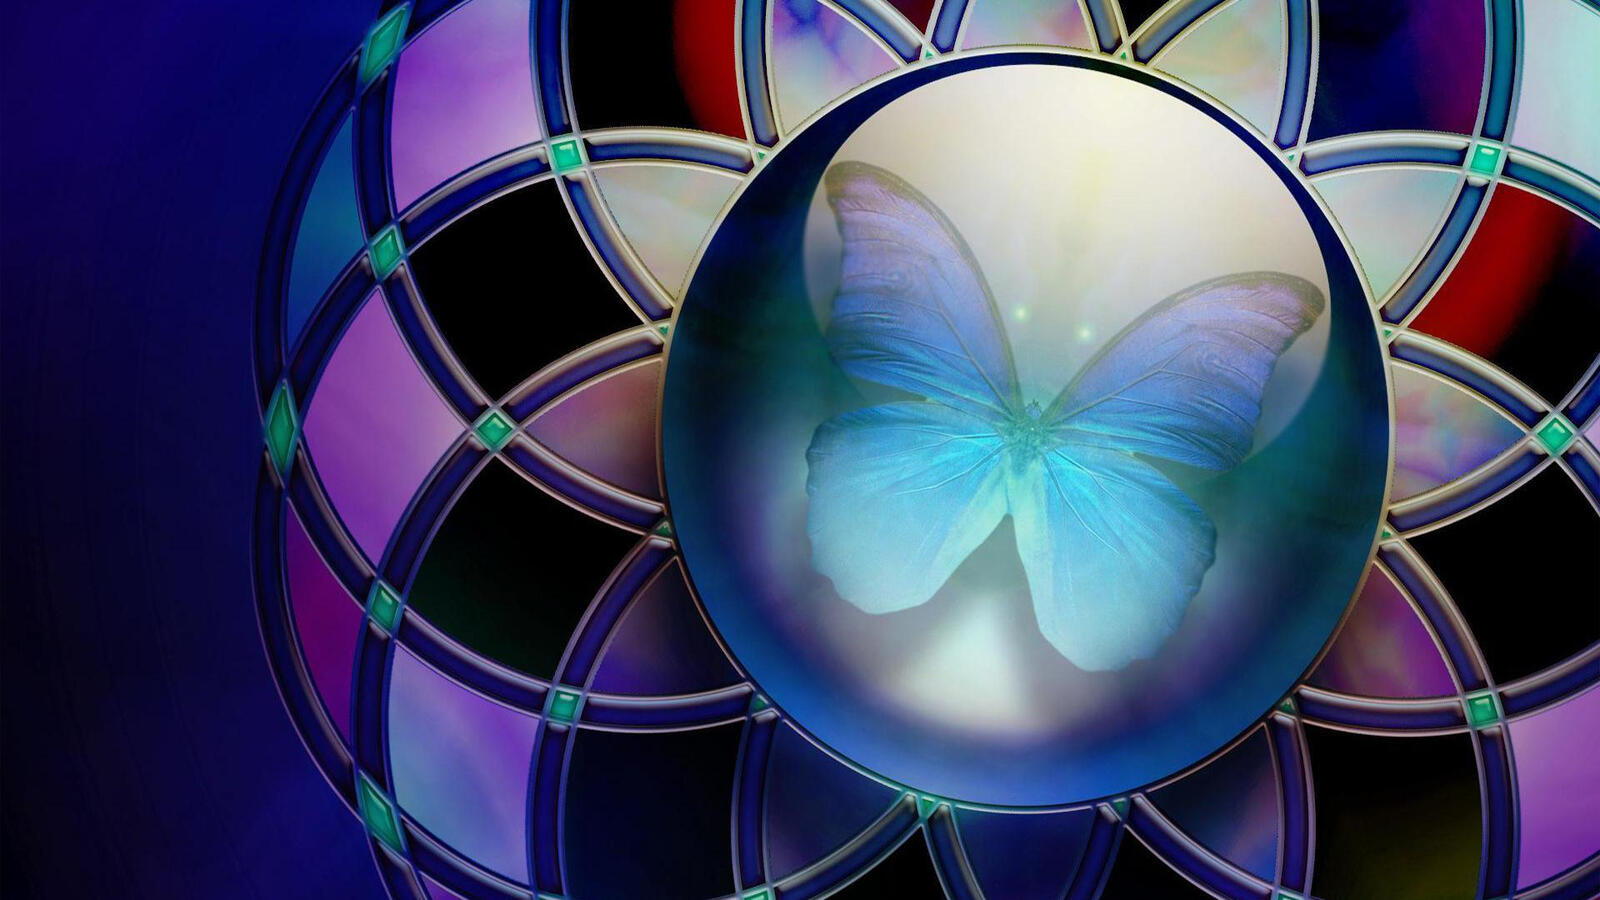 Wallpapers ball circle butterfly on the desktop